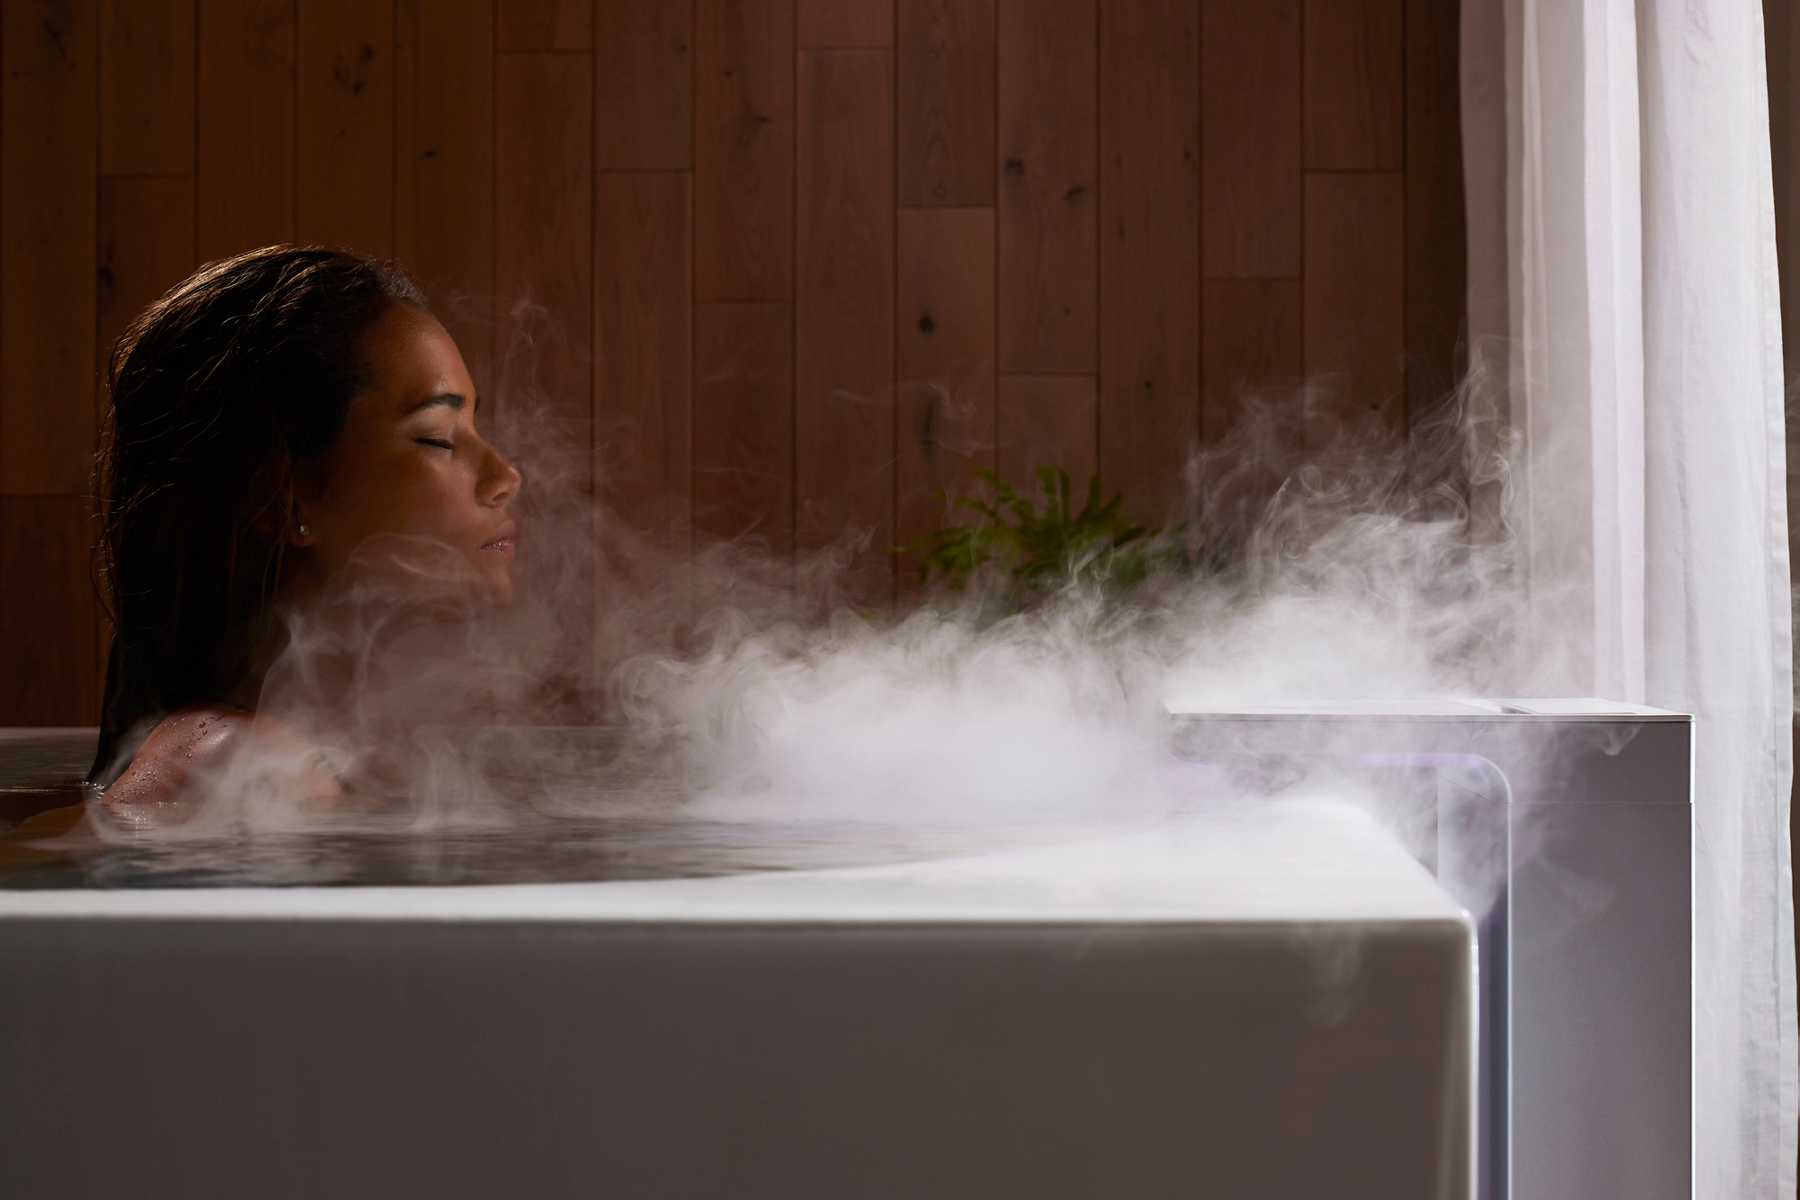 A woman relaxing in a bathtub surrounded by steam.